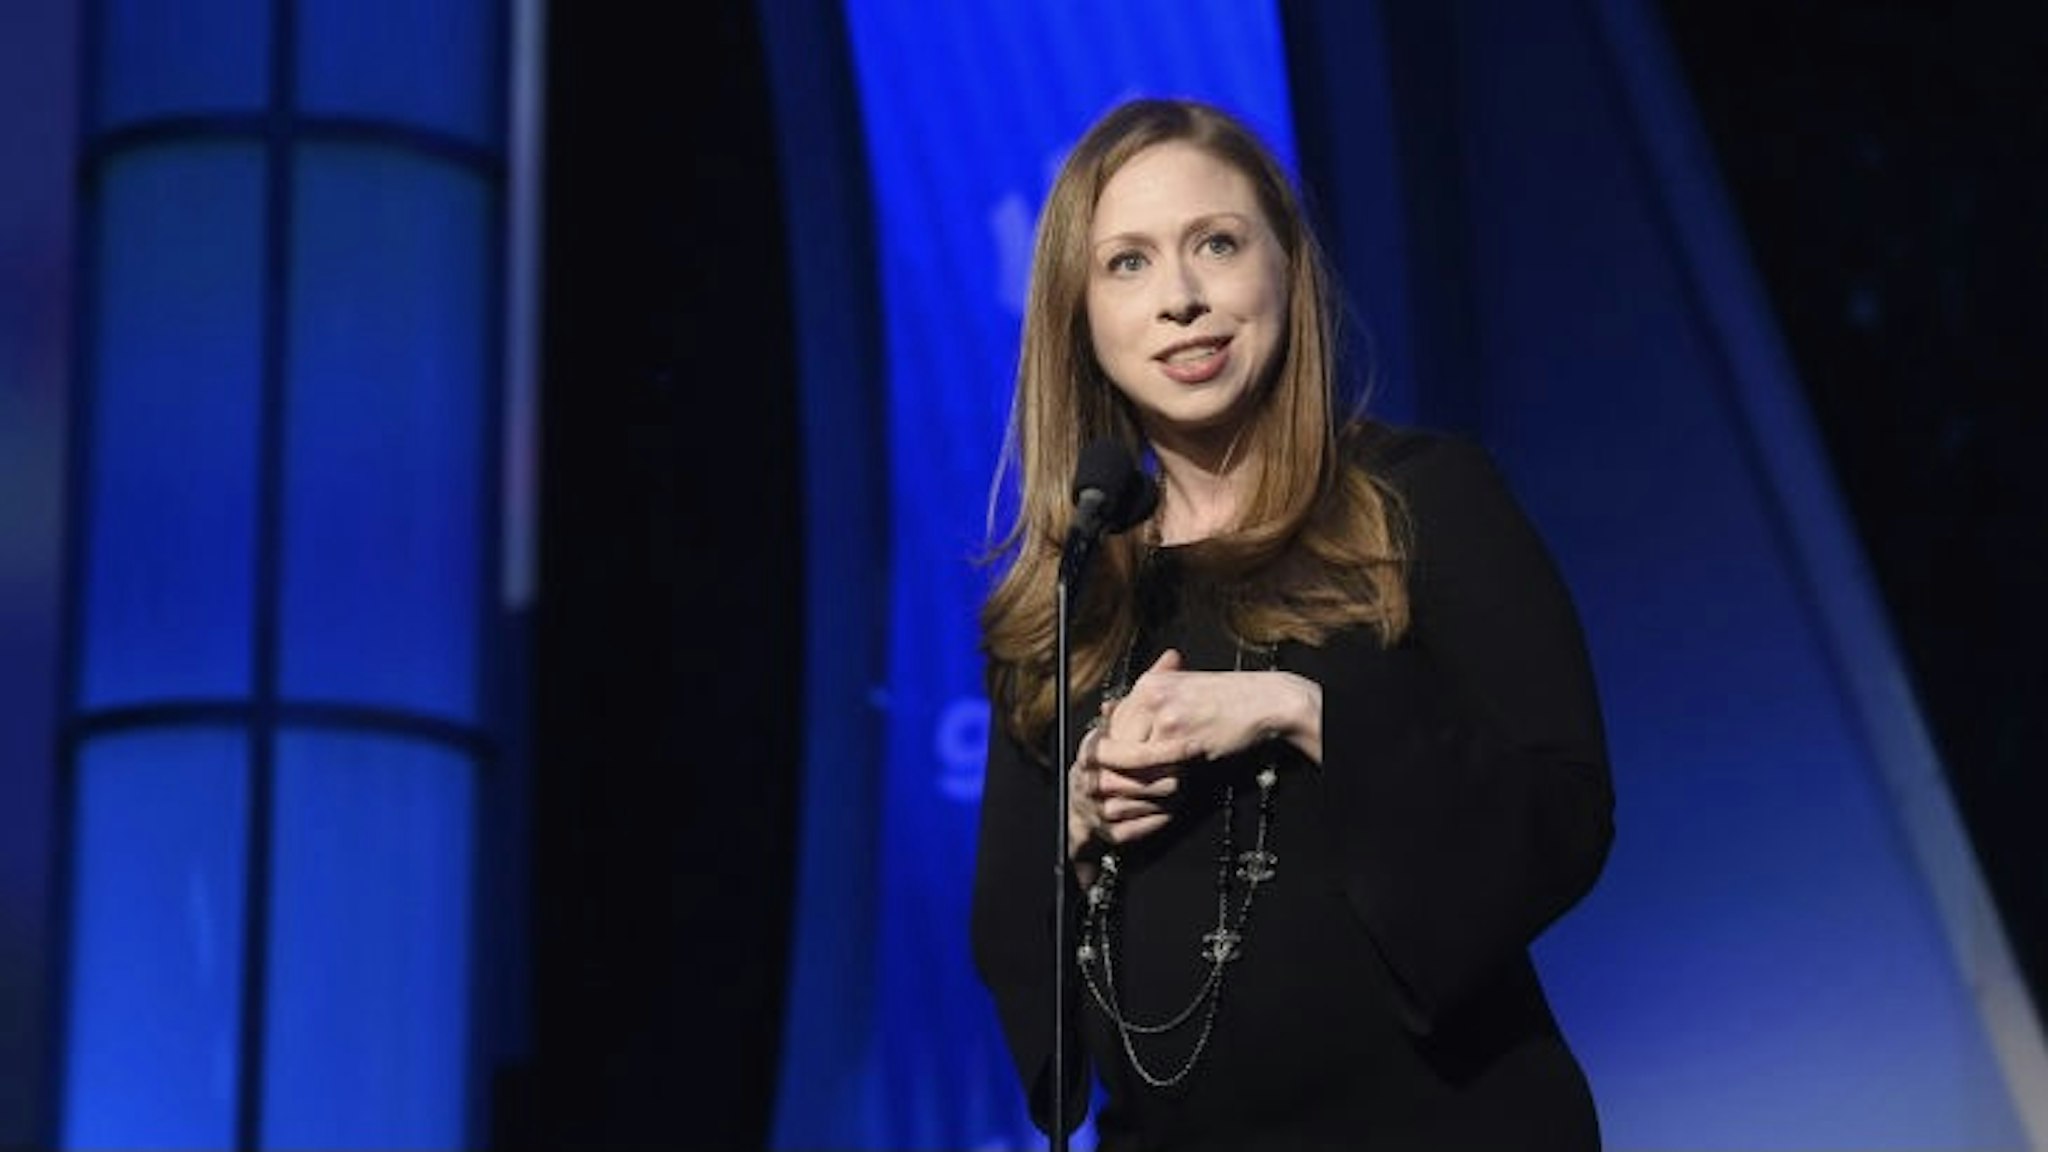 NEW YORK, NEW YORK - MAY 04: Chelsea Clinton speaks onstage during the 30th Annual GLAAD Media Awards New York at New York Hilton Midtown on May 4, 2019 in New York City. (Photo by Jamie McCarthy/Getty Images for GLAAD)